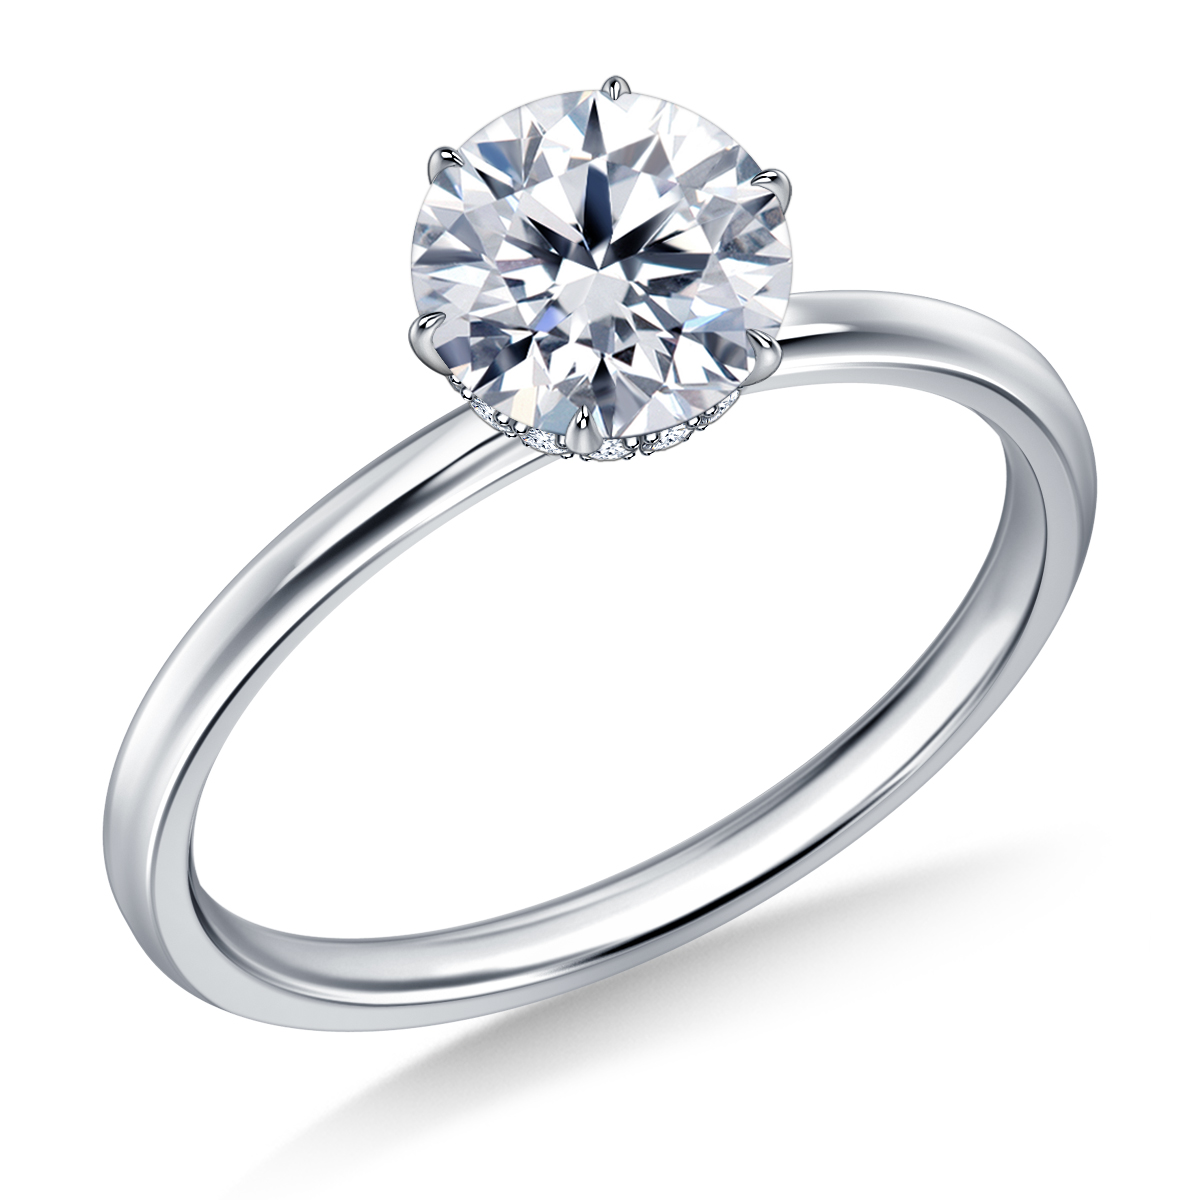 Diamond Halo Solitaire Engagement Ring with Six Prong Setting in 14K White Gold